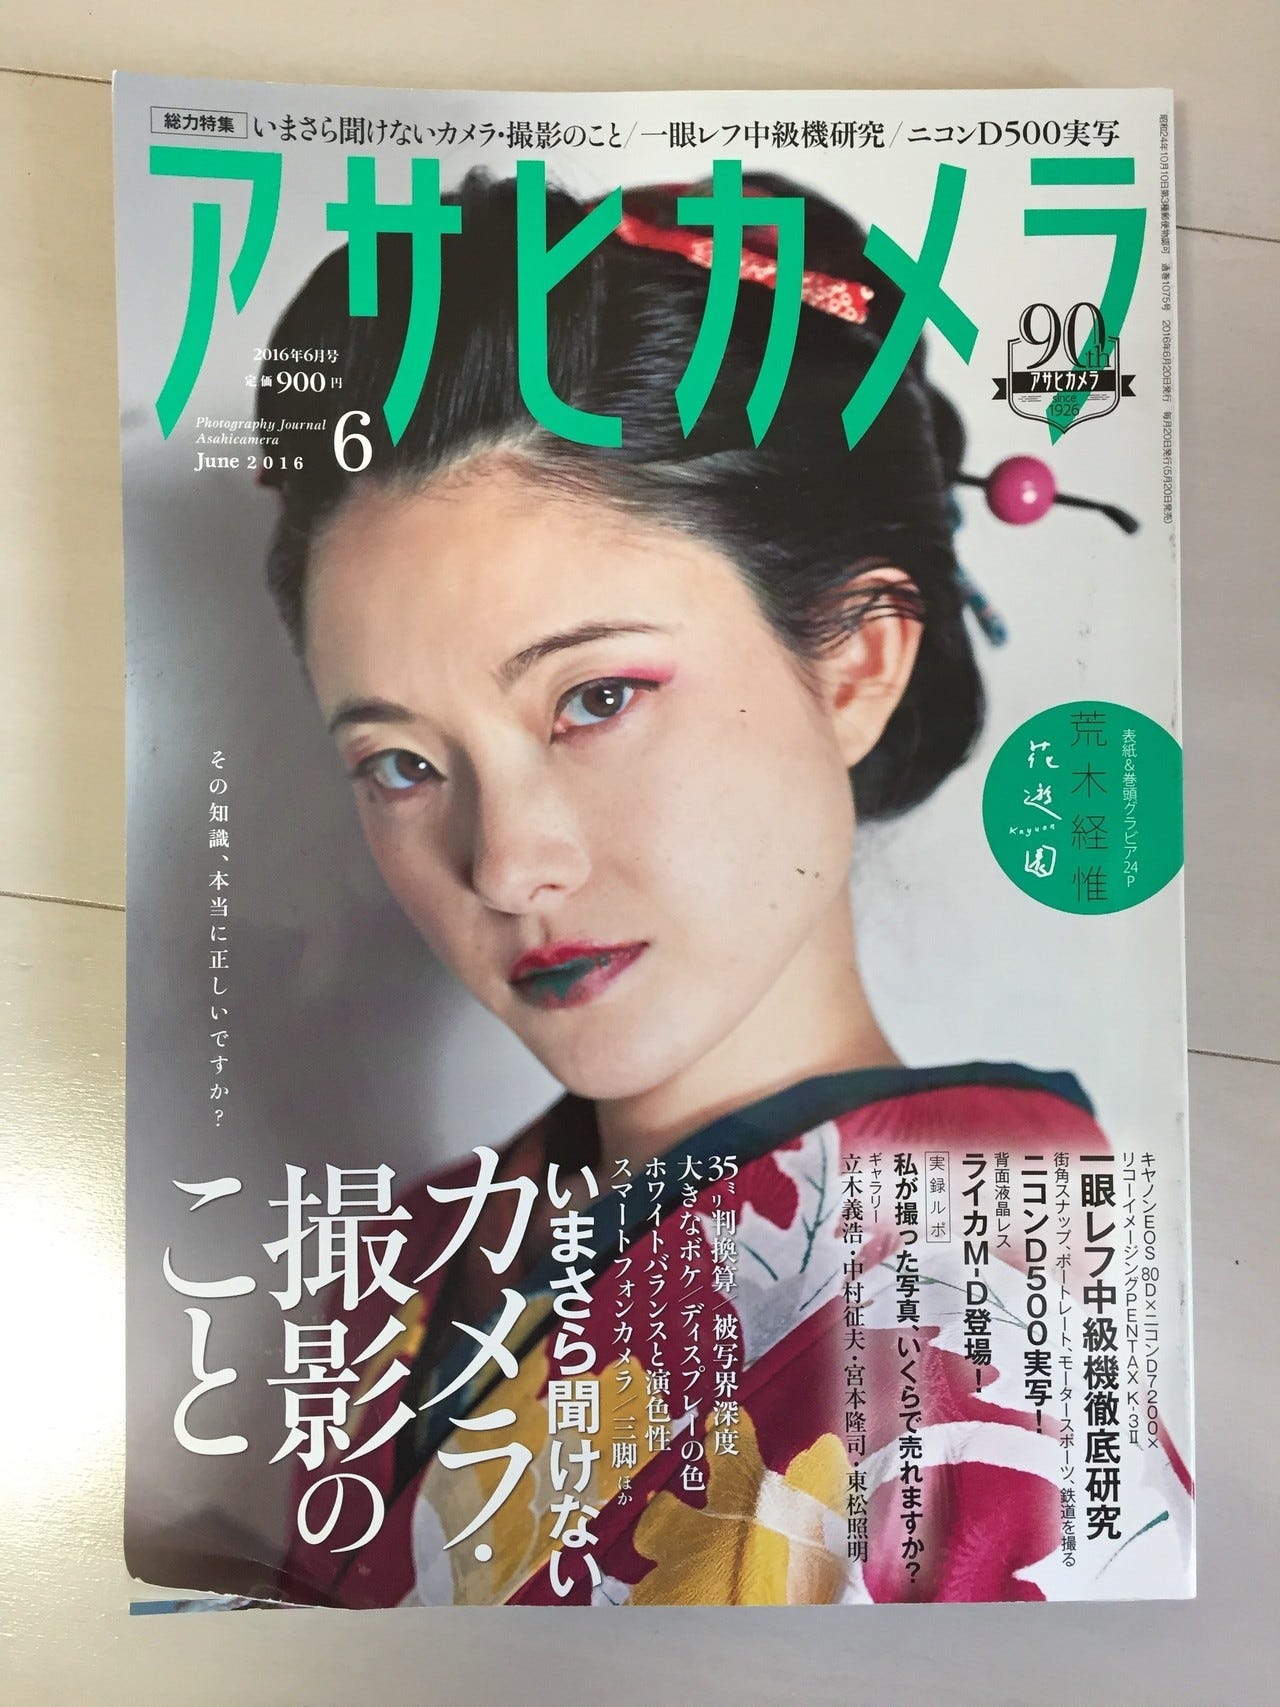 The next challenge stems from Araki ways of drawing with Vogue magazin